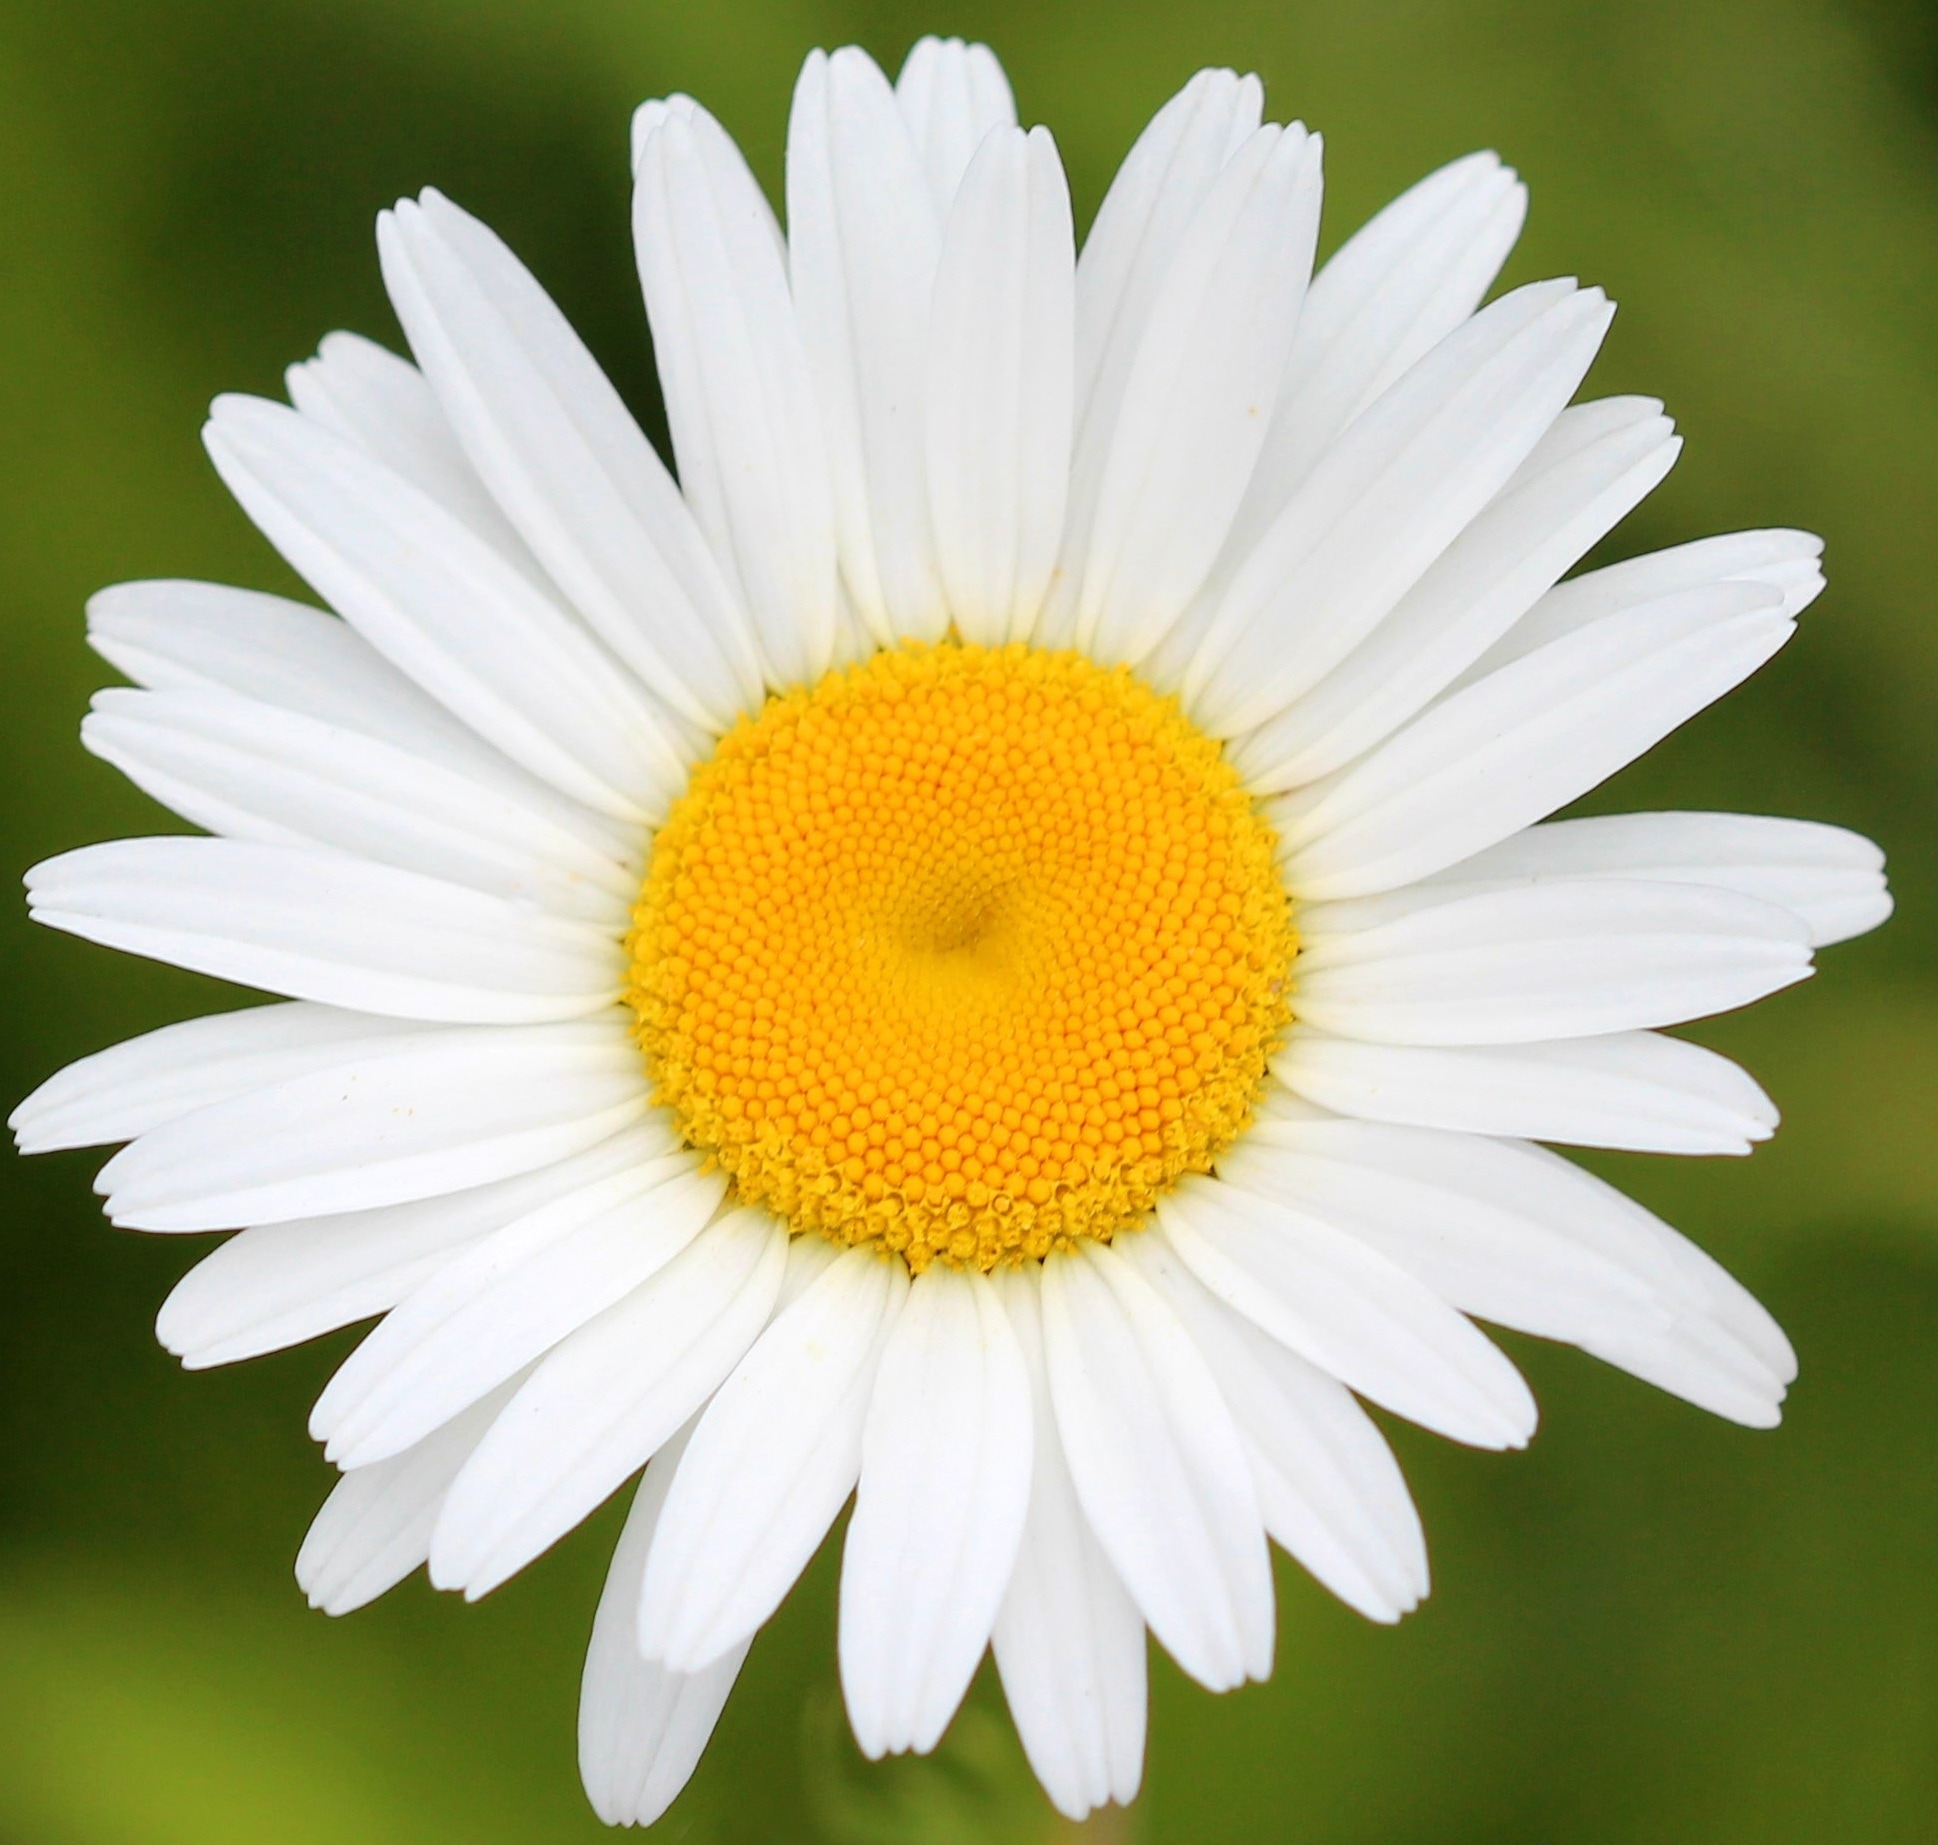 white and yellow flower